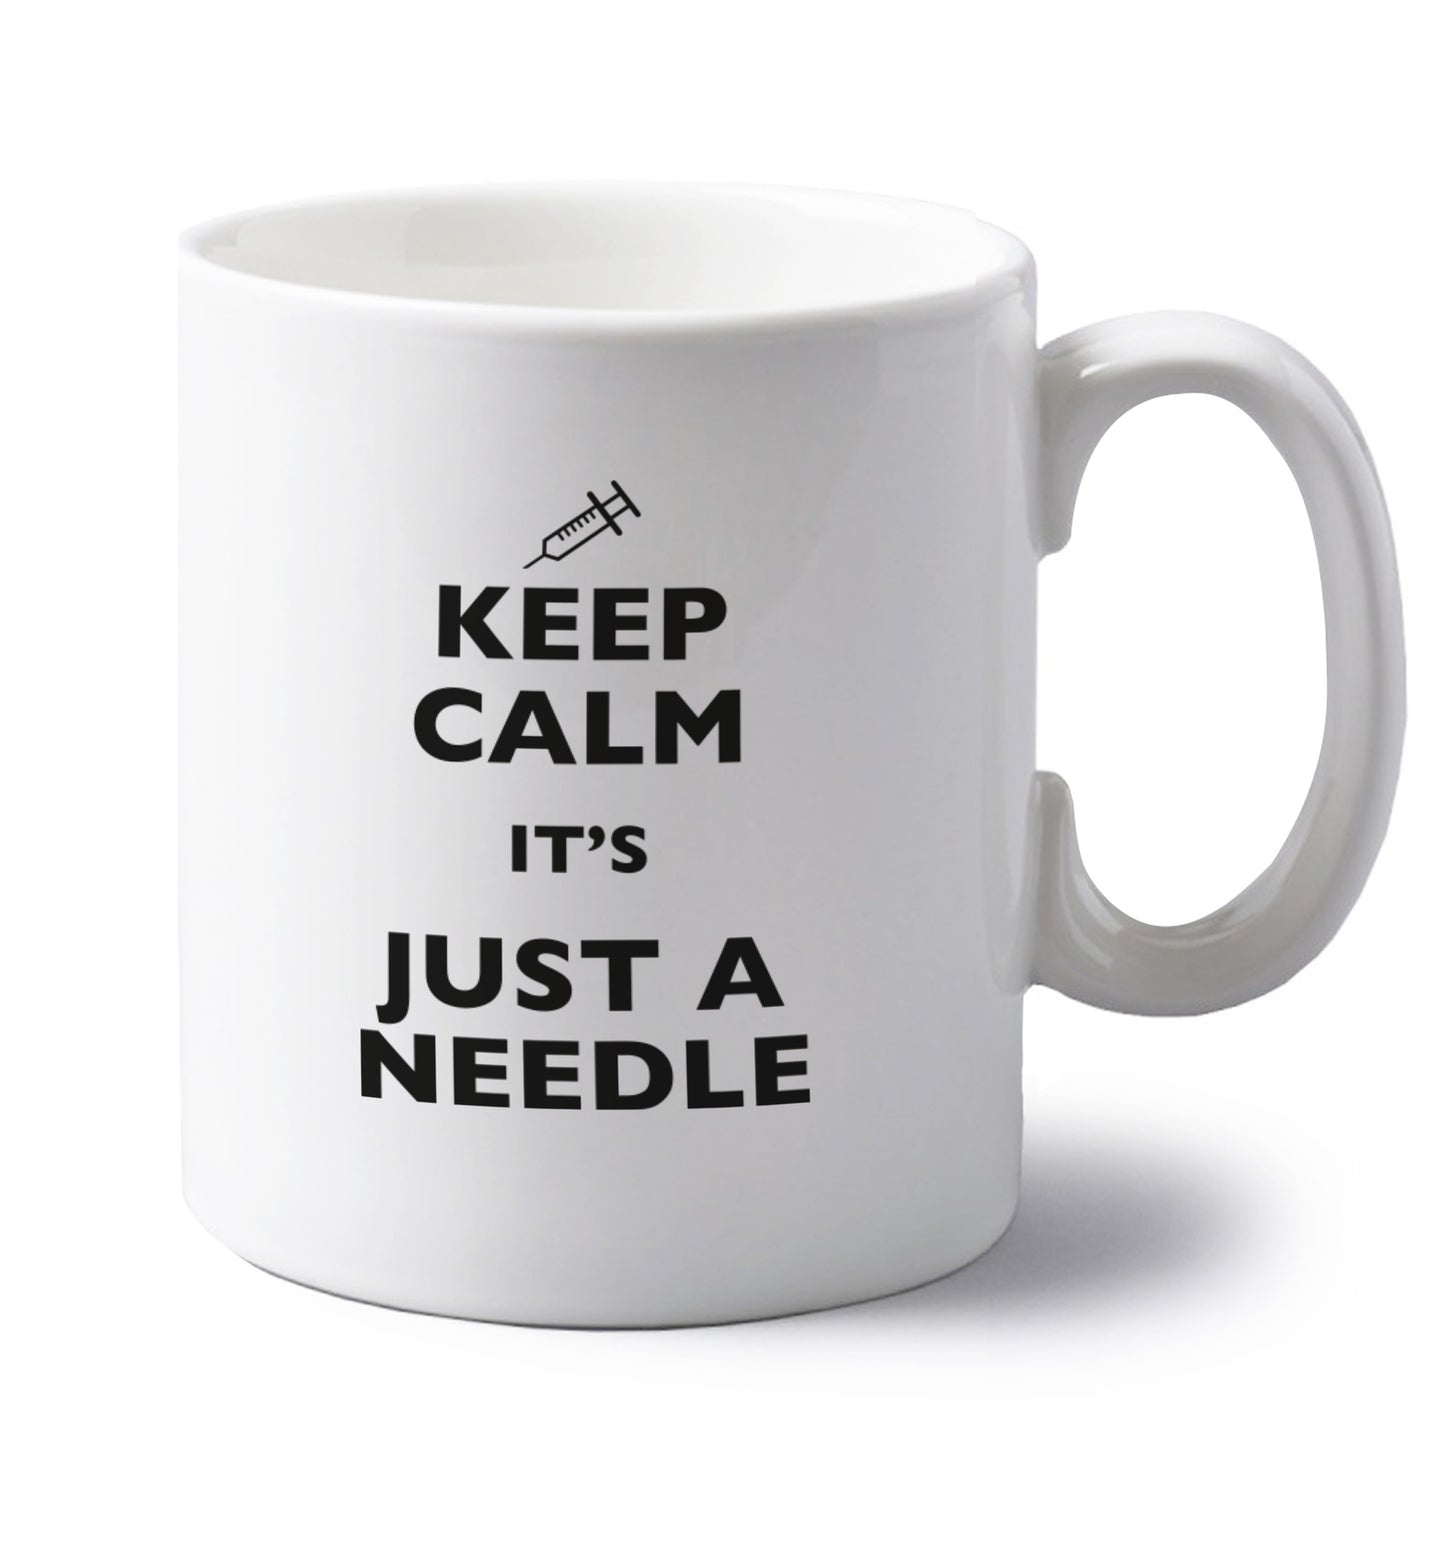 Keep calm it's only a needle left handed white ceramic mug 